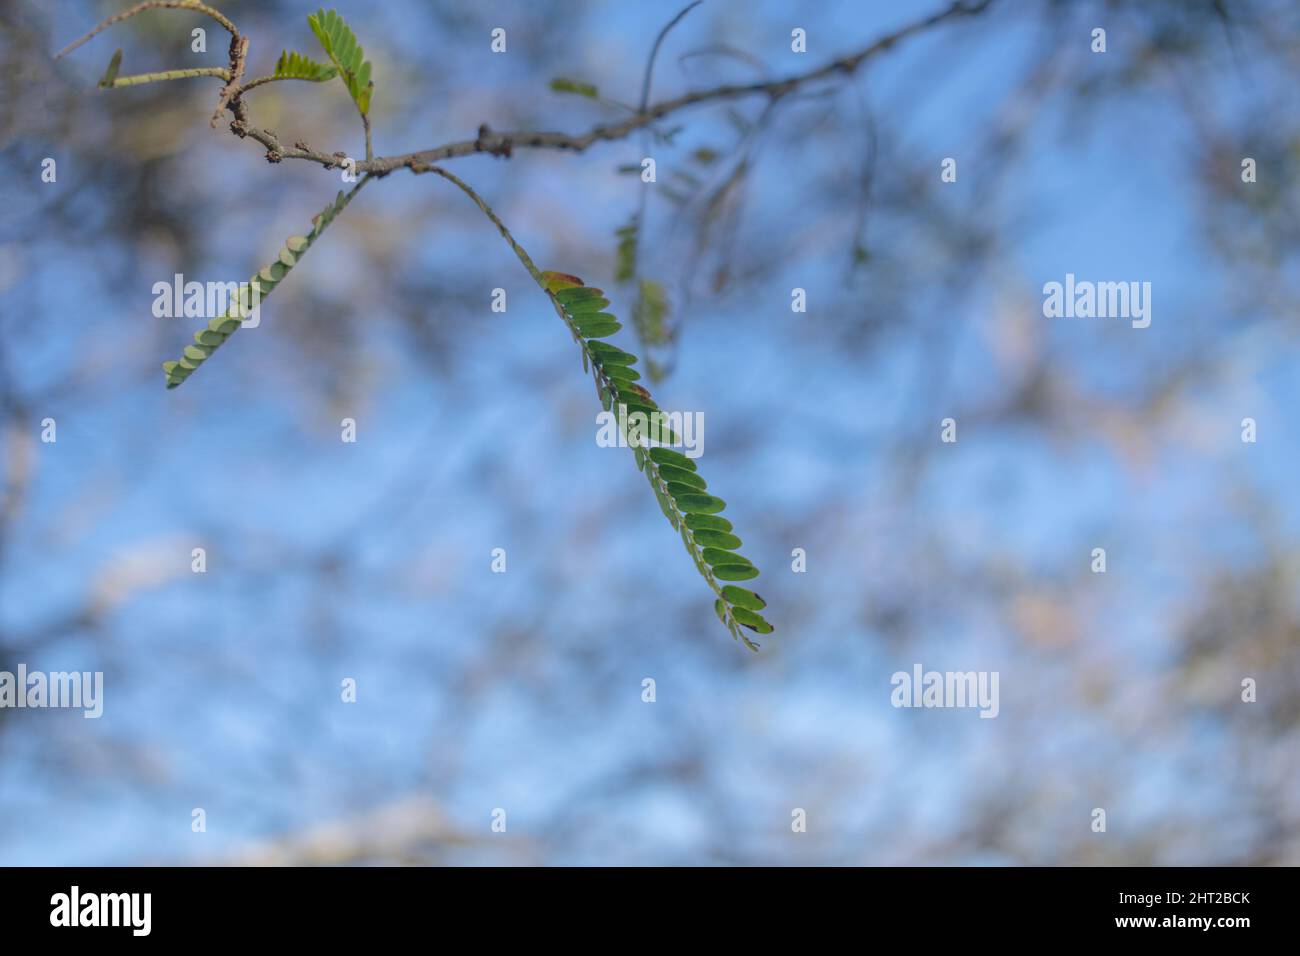 Shallow focus of Prosopis velutina leaf plant with blurred trees  and sky in the background Stock Photo